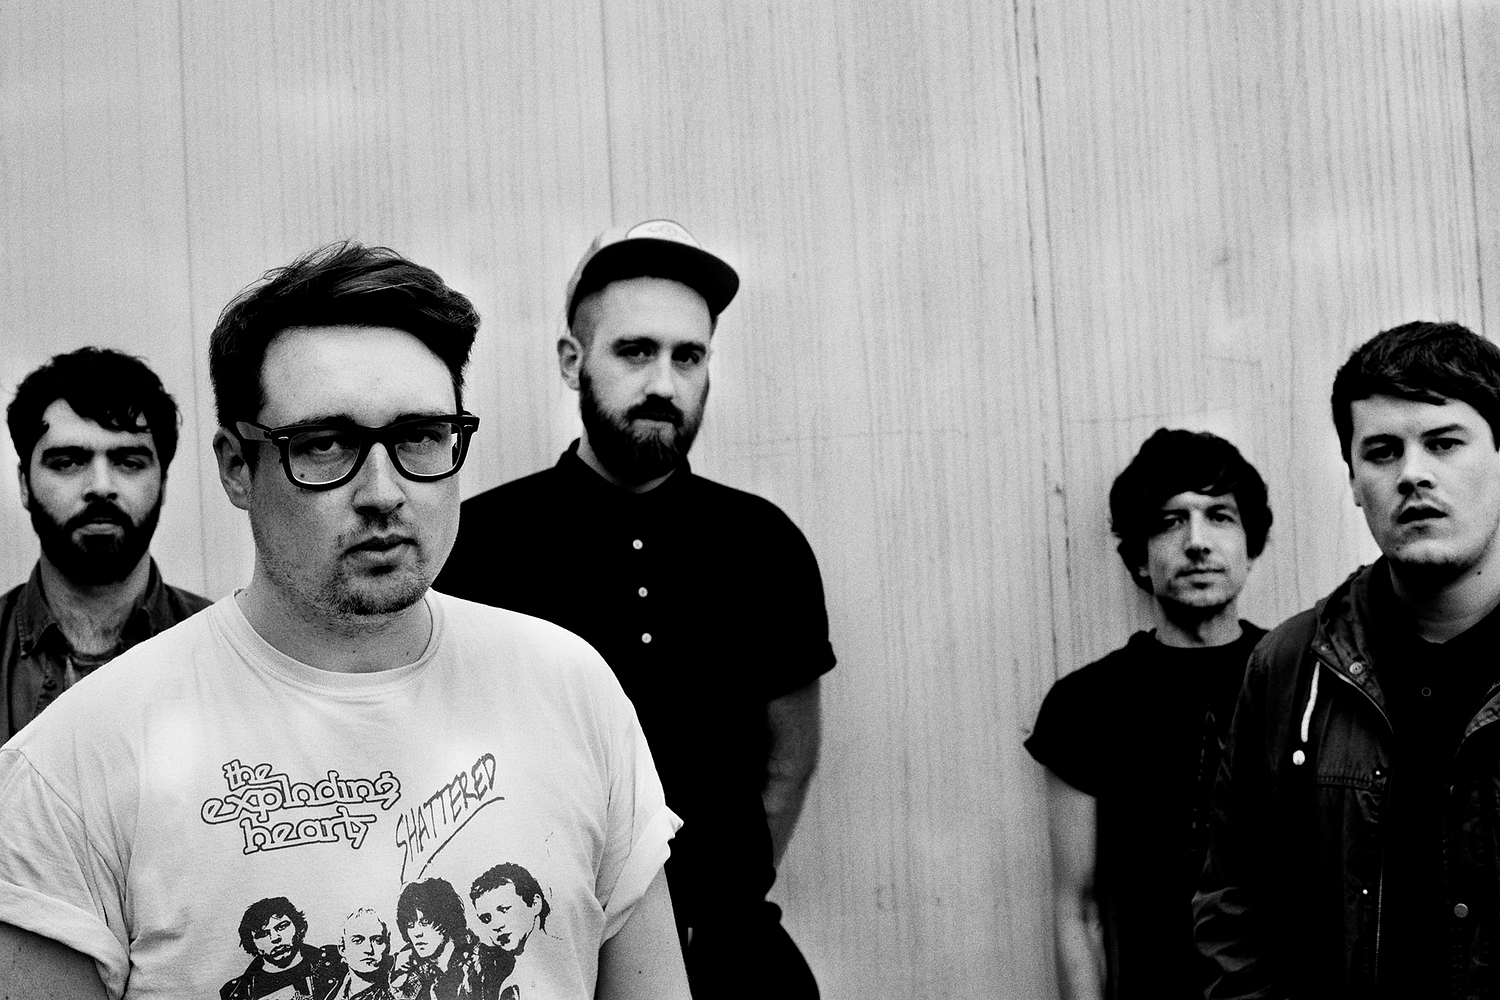 Hookworms: “Our new album’s a bit more upbeat, it sounds like us but with the fat trimmed”